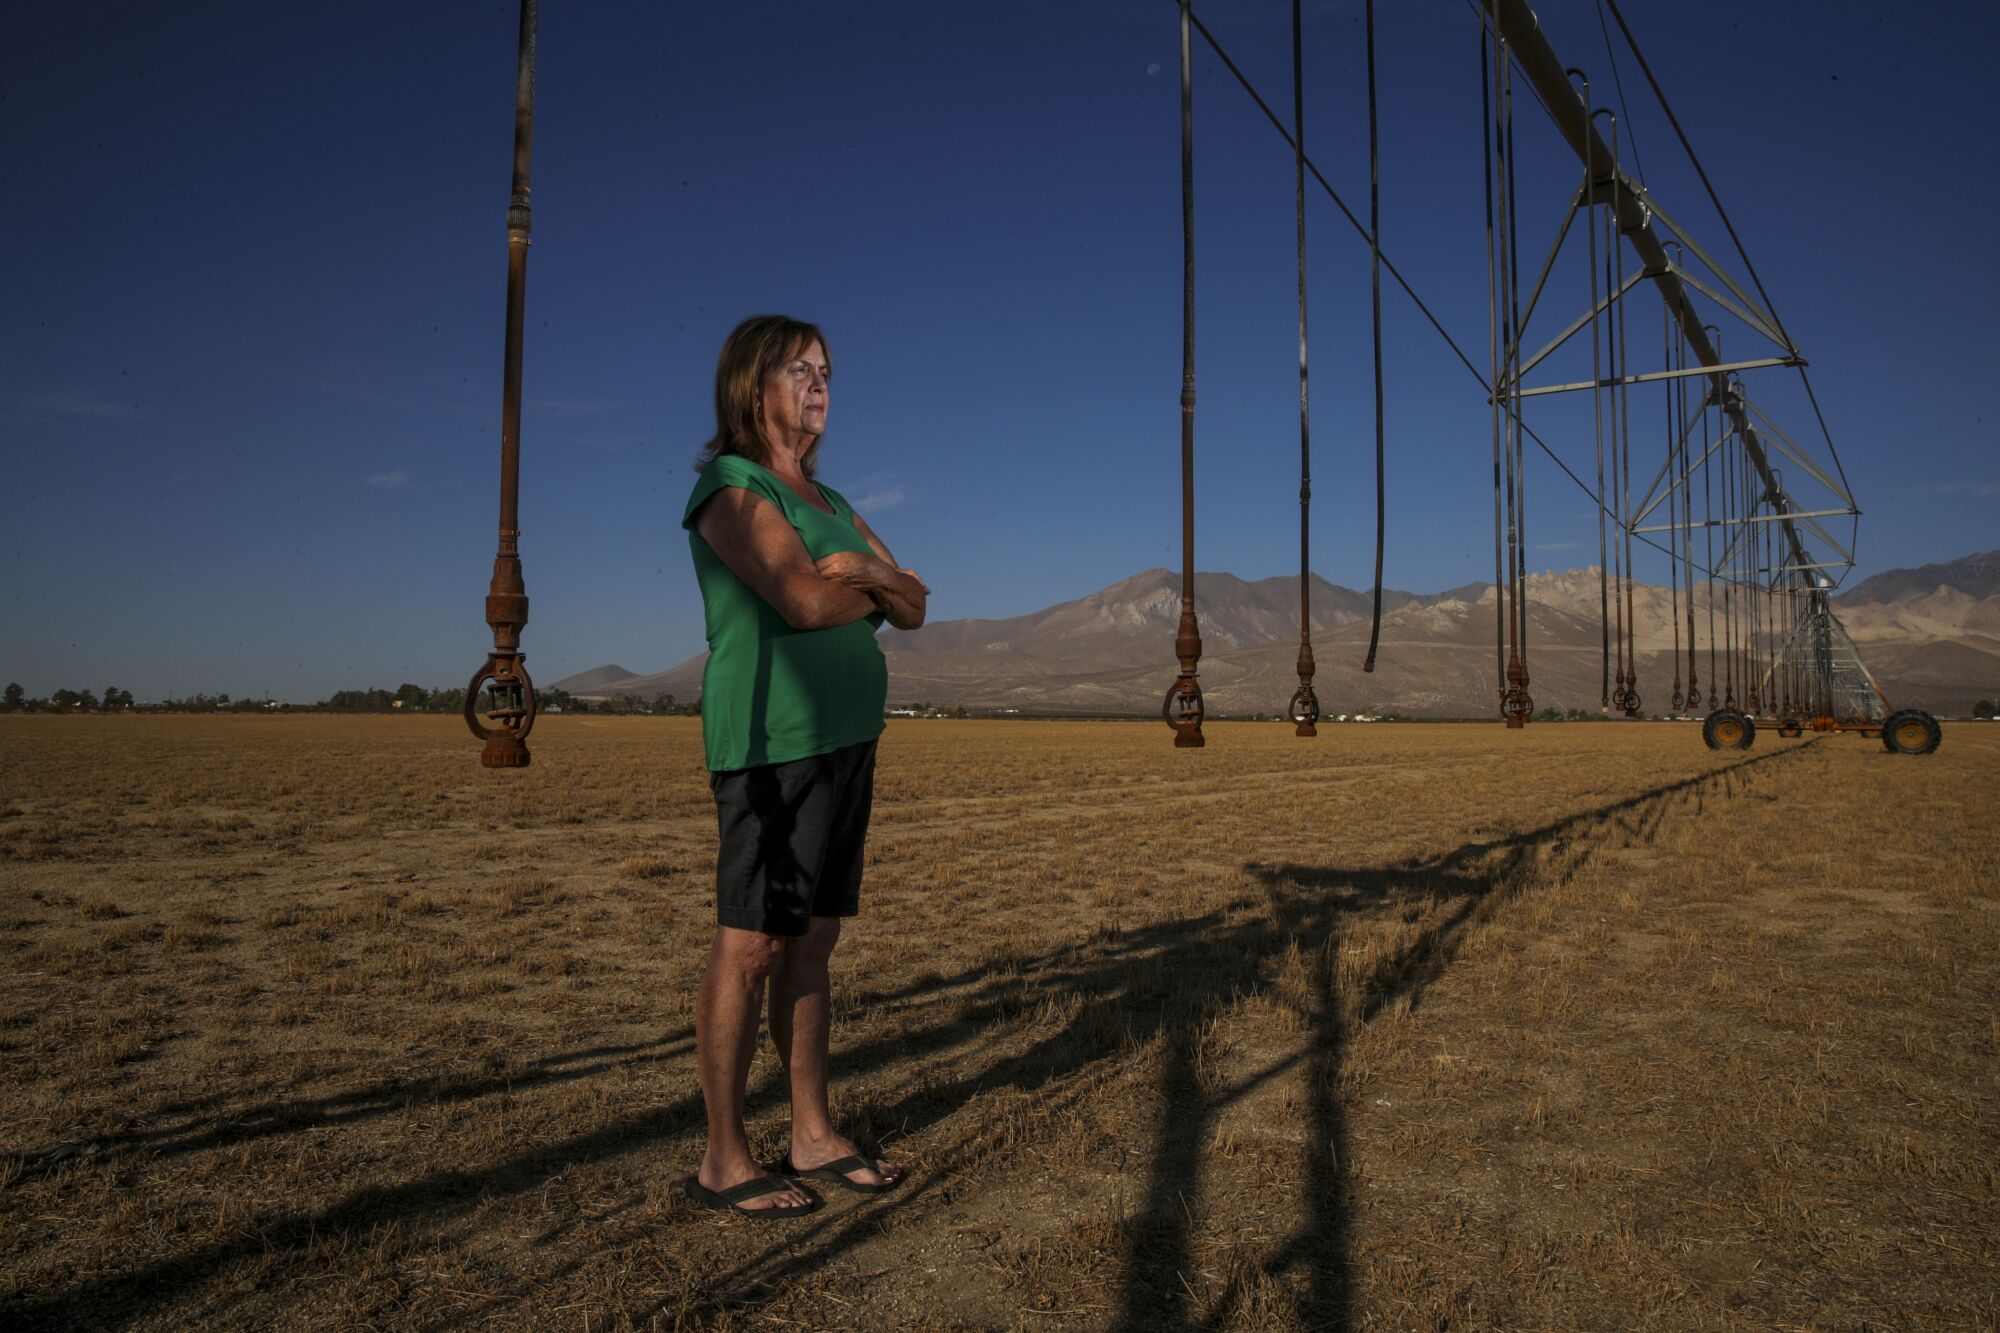 A woman stands in a barren field beneath irrigation pipes